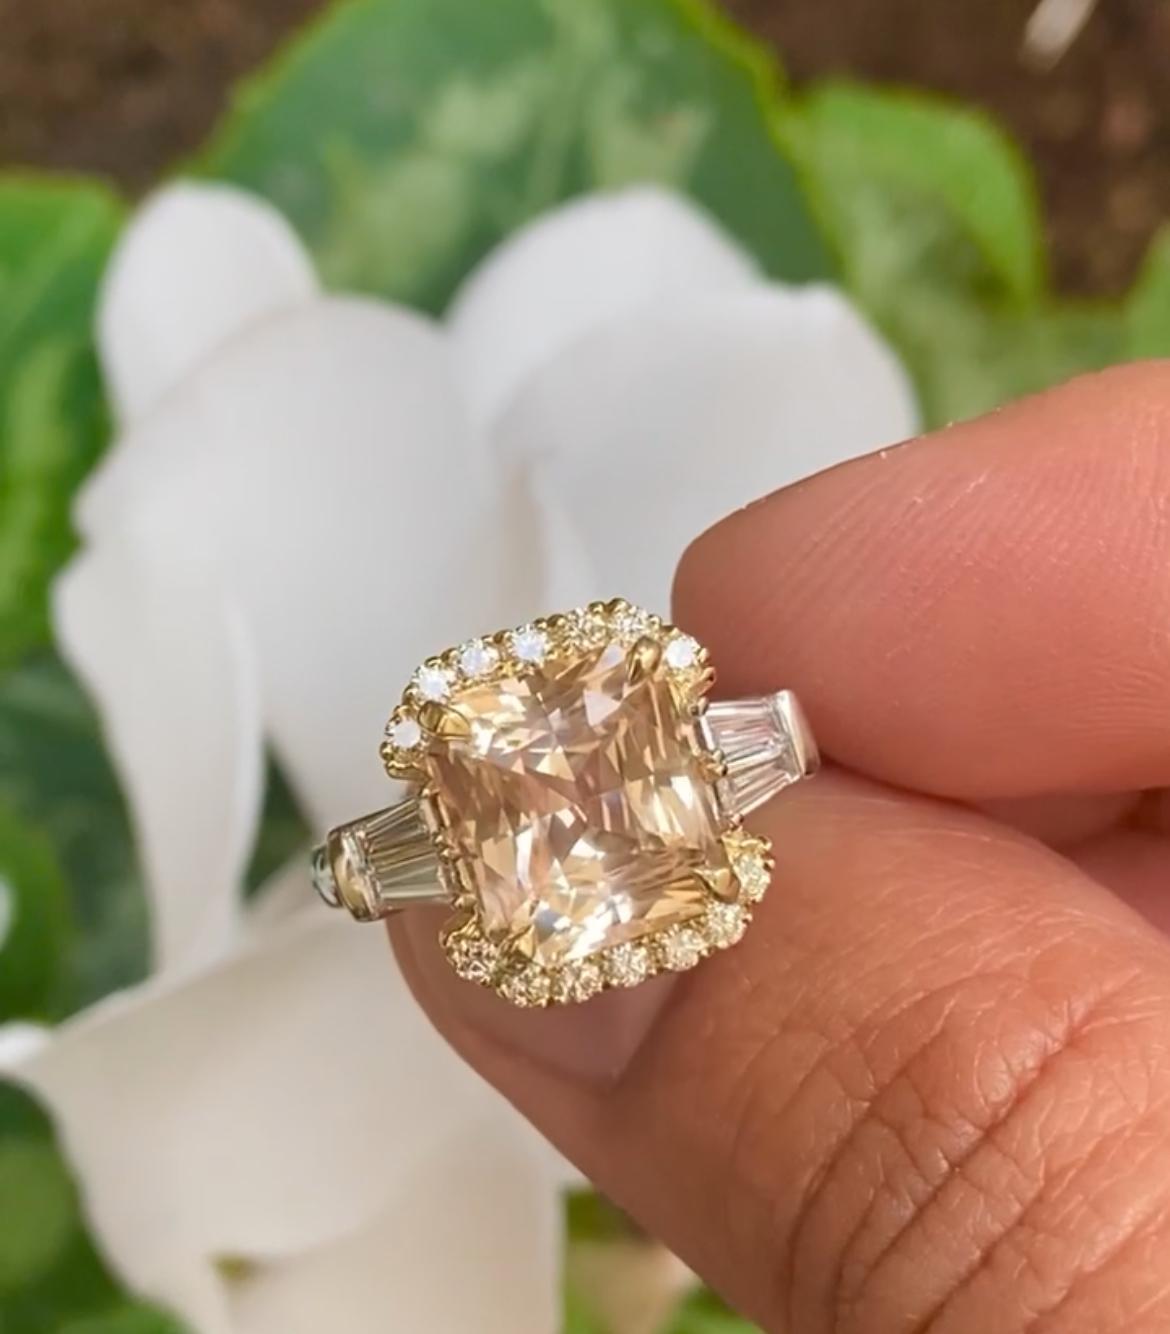 The unique color of this peach sapphire is perfectly showcased in this striking platinum ring. 

Featuring an untreated 6.02-carat, peachy-apricot Sapphire from Sri Lanka, supported by tapered-baguette diamonds totaling 0.41ct and round